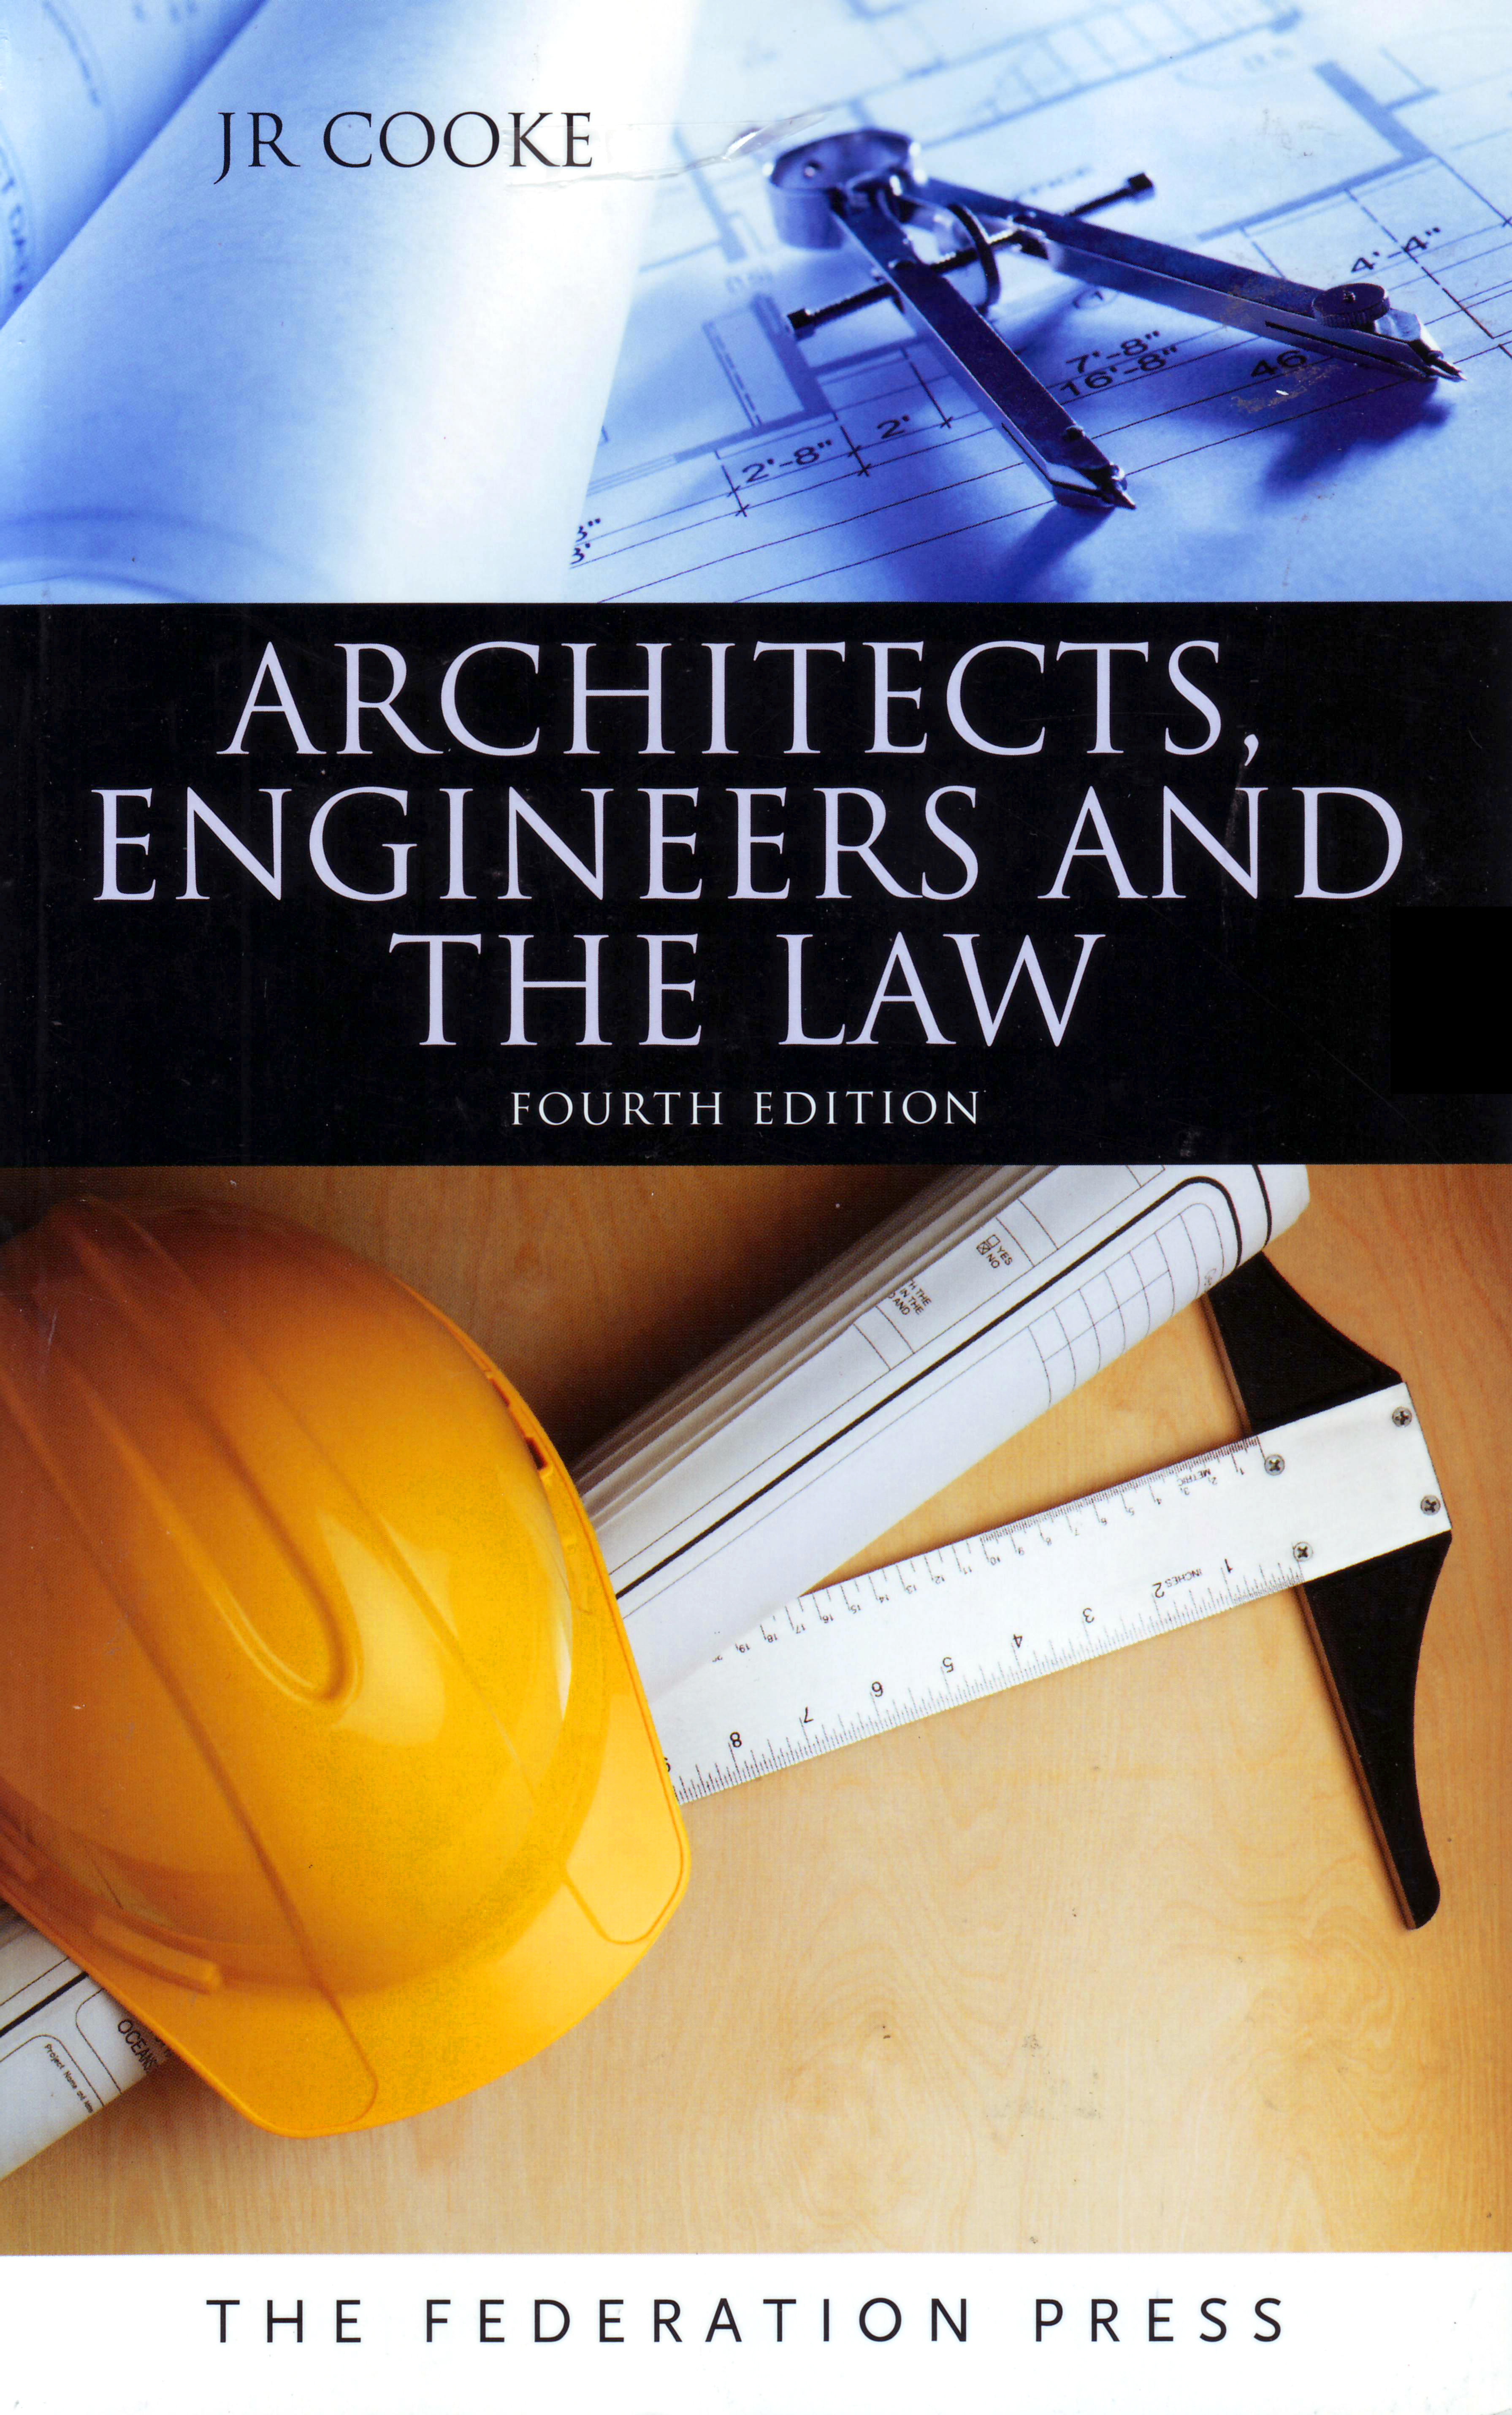 Architects, Engineers and the Law e4